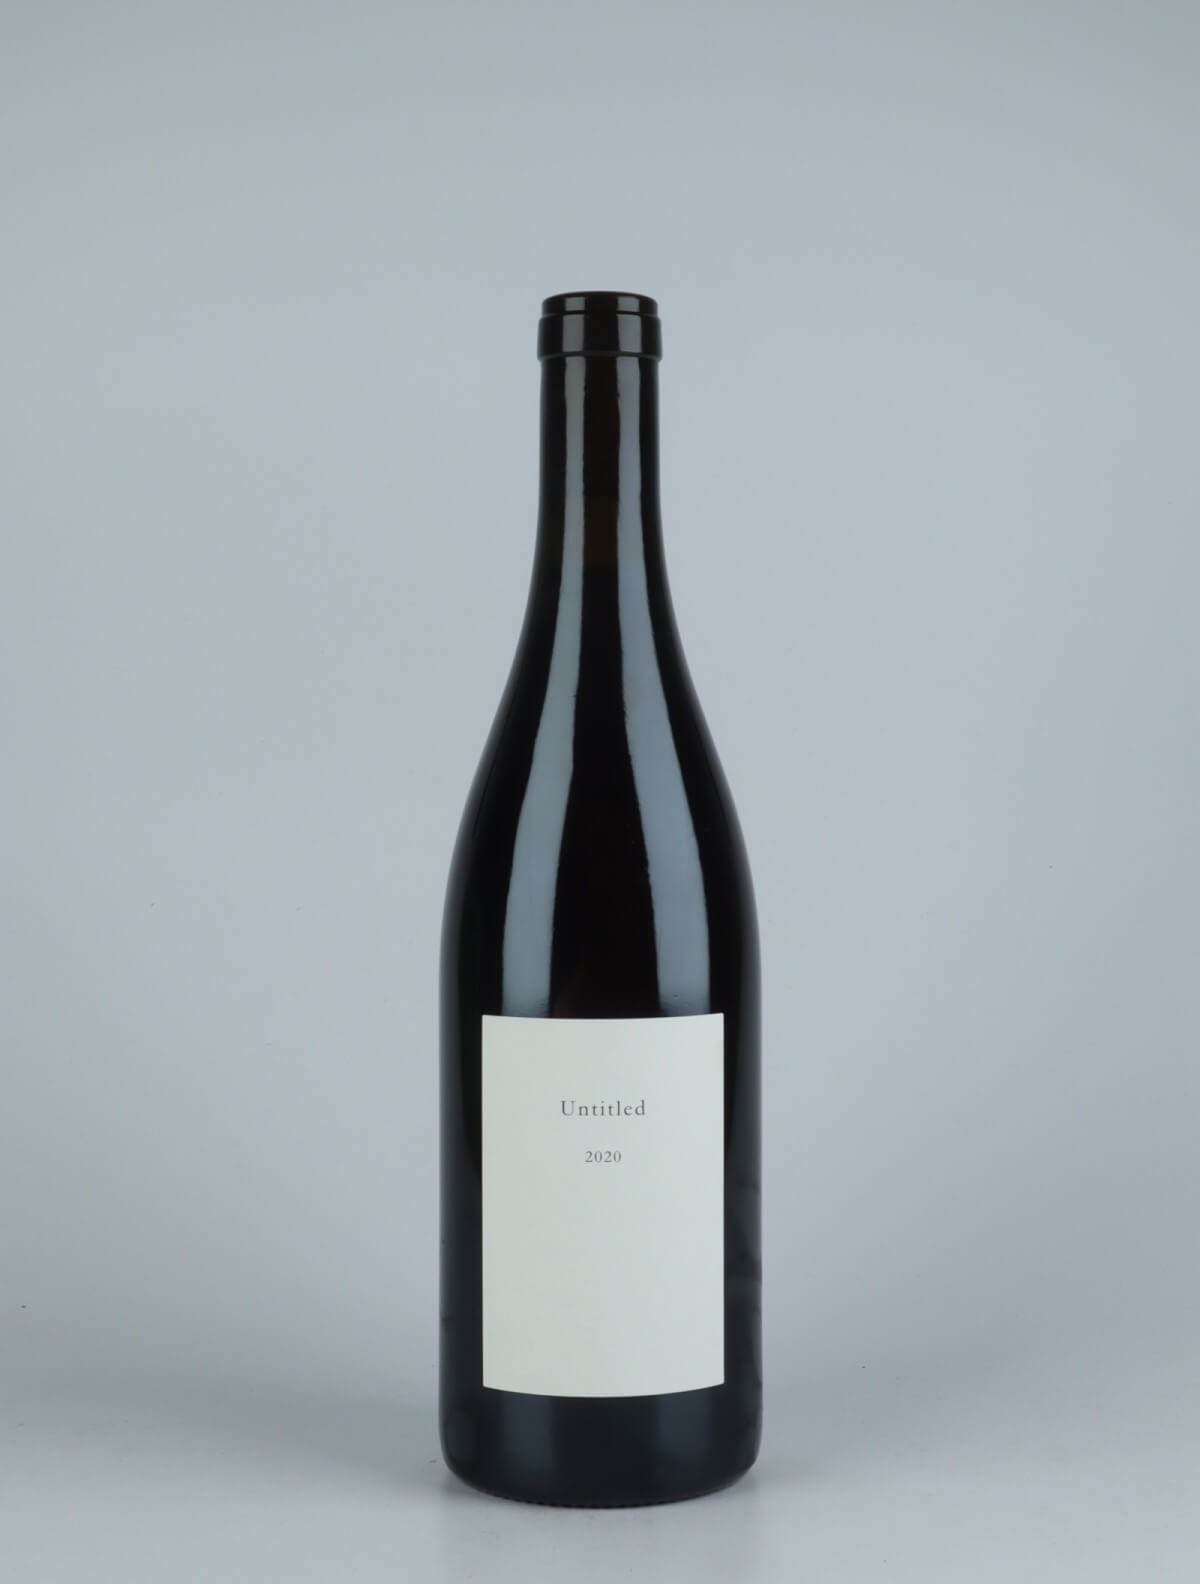 A bottle 2020 Untitled Red wine from Les Frères Soulier, Rhône in France